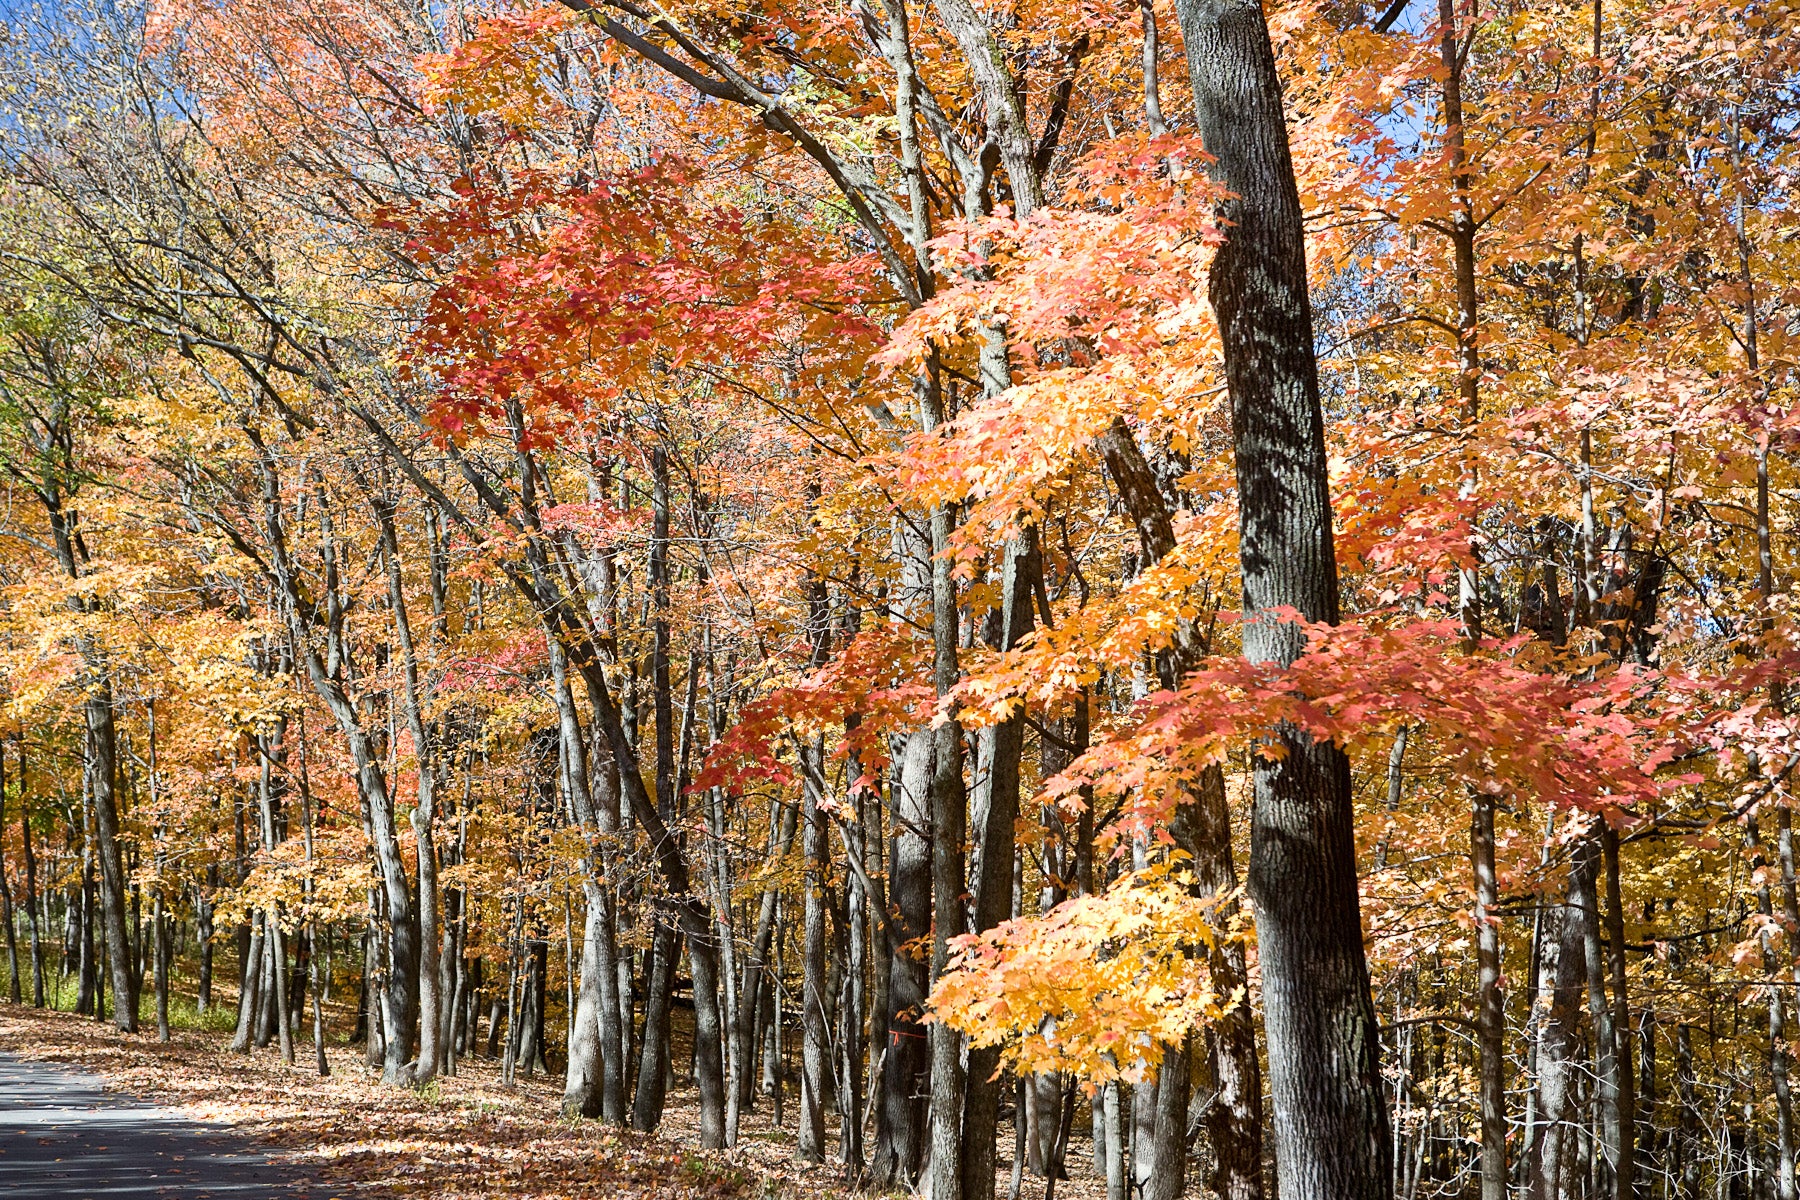 A line of trees with autumn red and yellow leaves